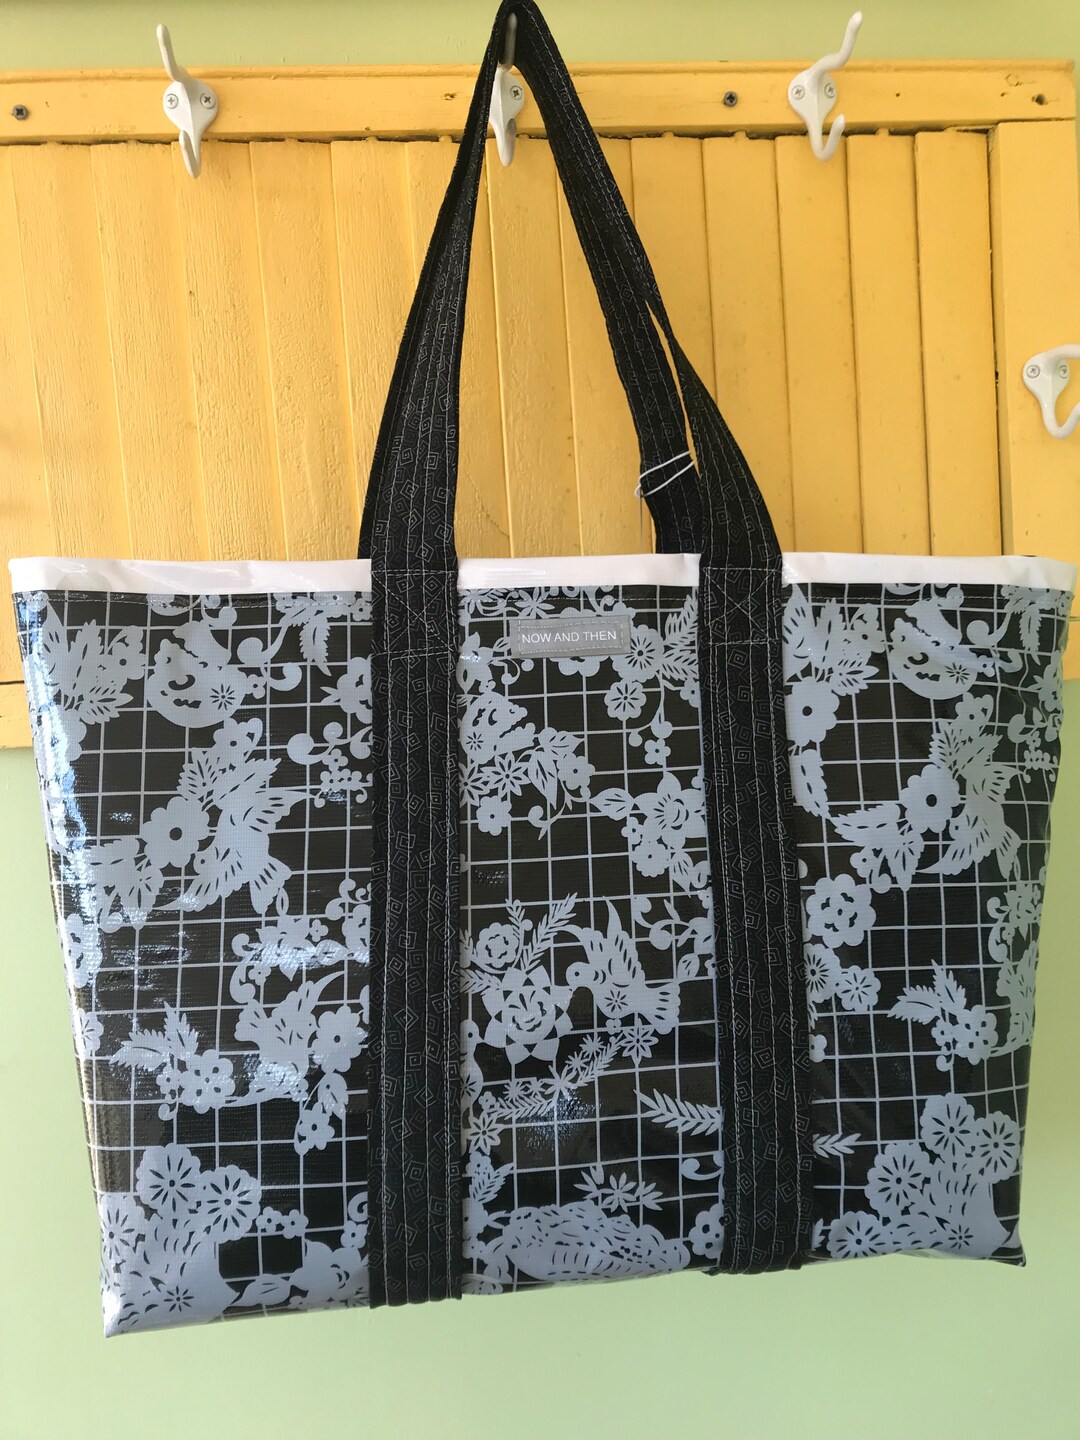 Day of the Deadblack and Gray Oilcloth Tote Bag - Etsy